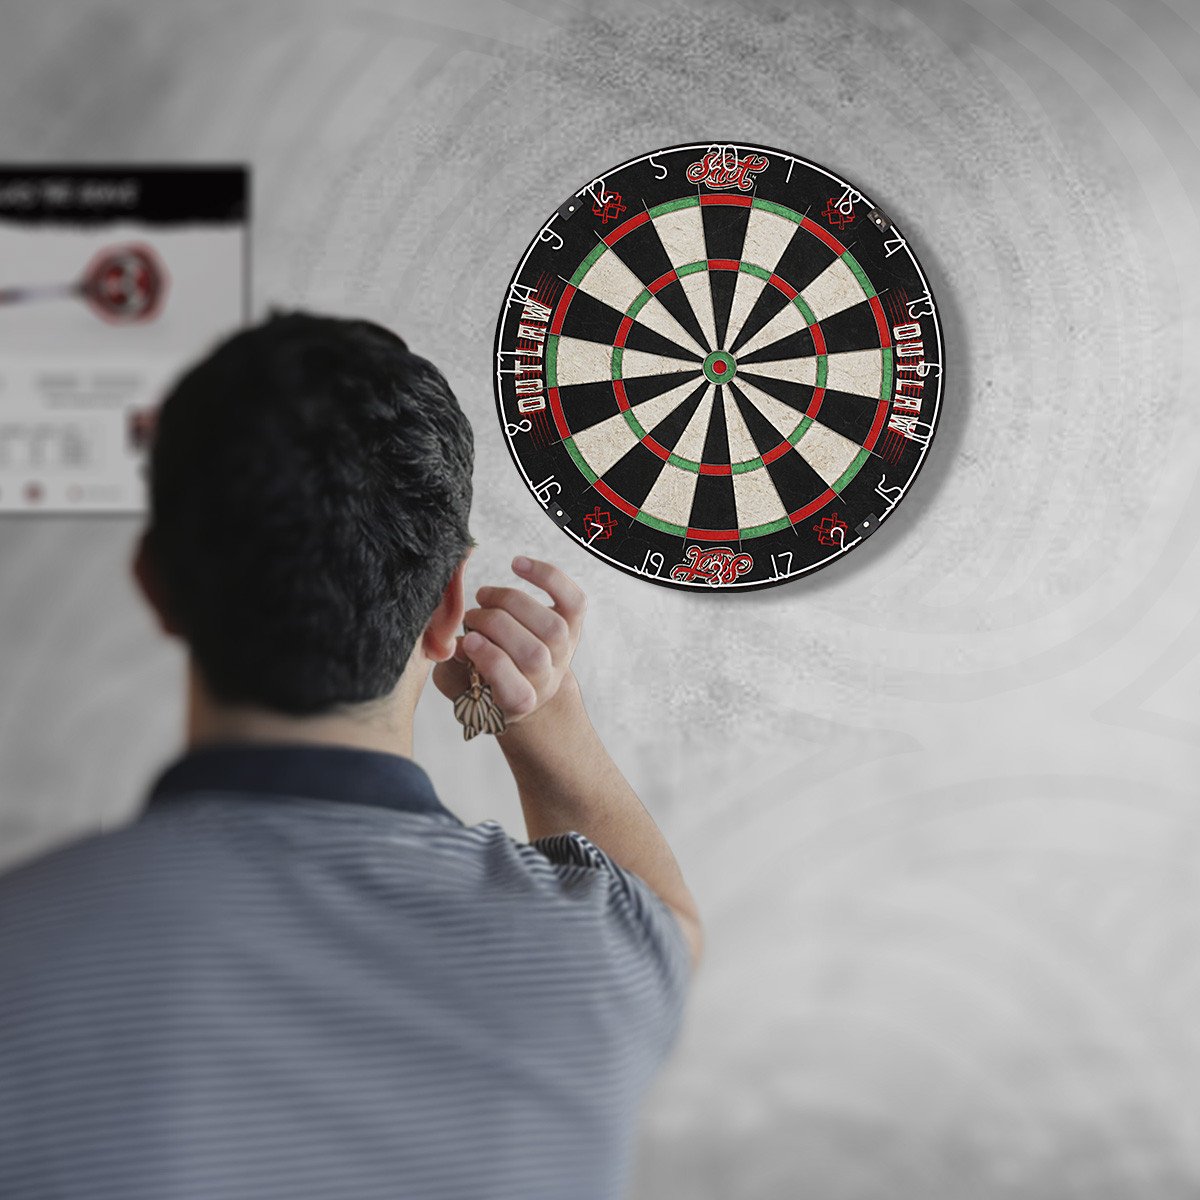 A starter for 5: basic dart games you should know